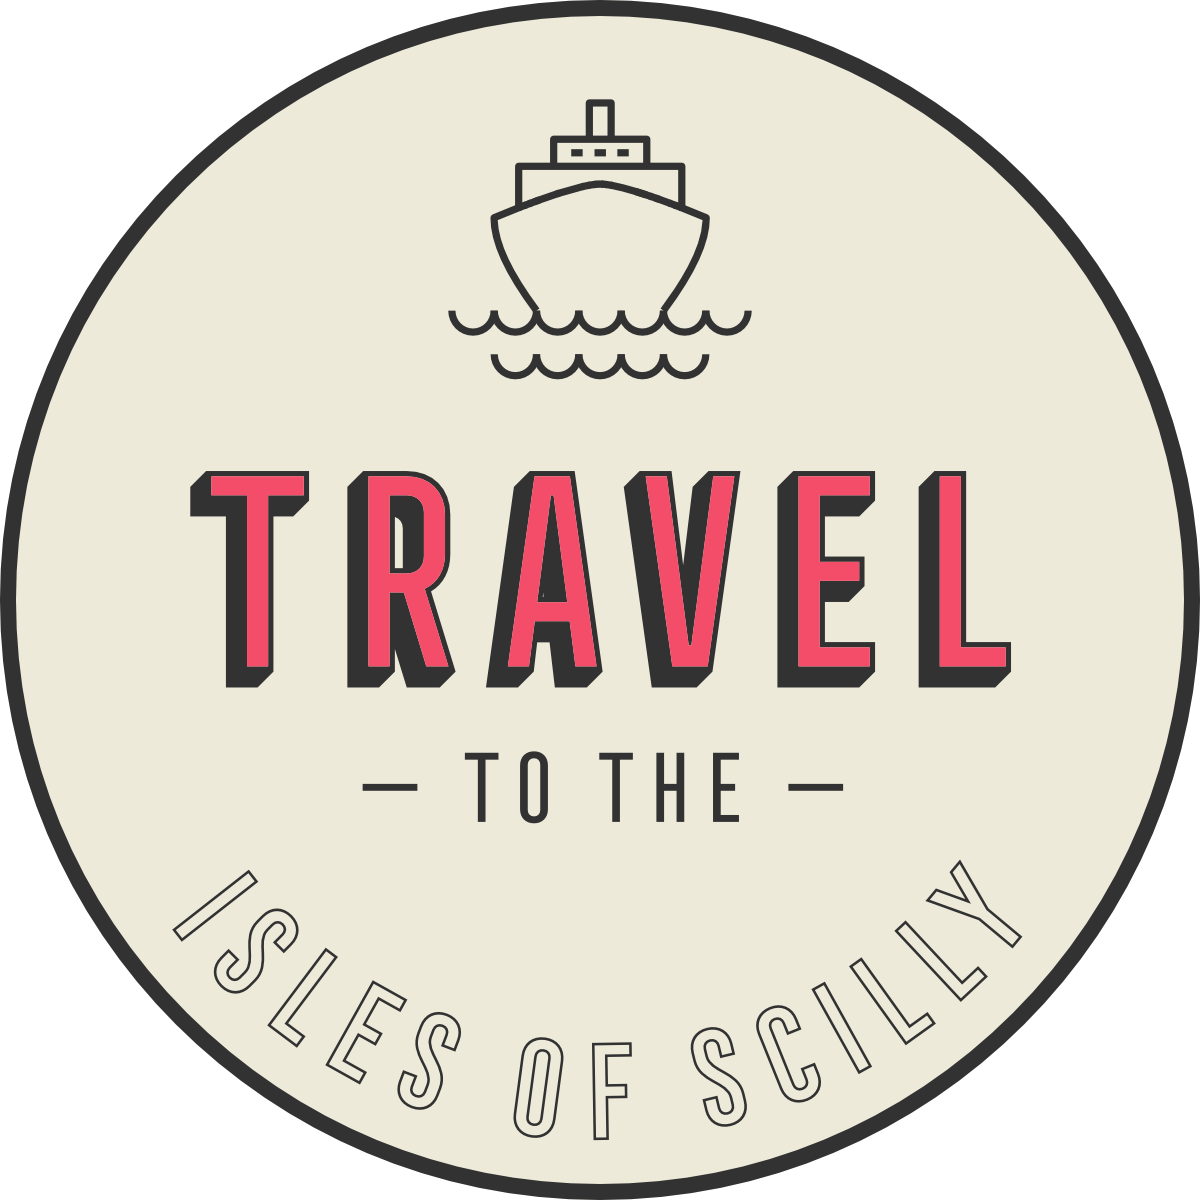 Travel to the Isles of Scilly